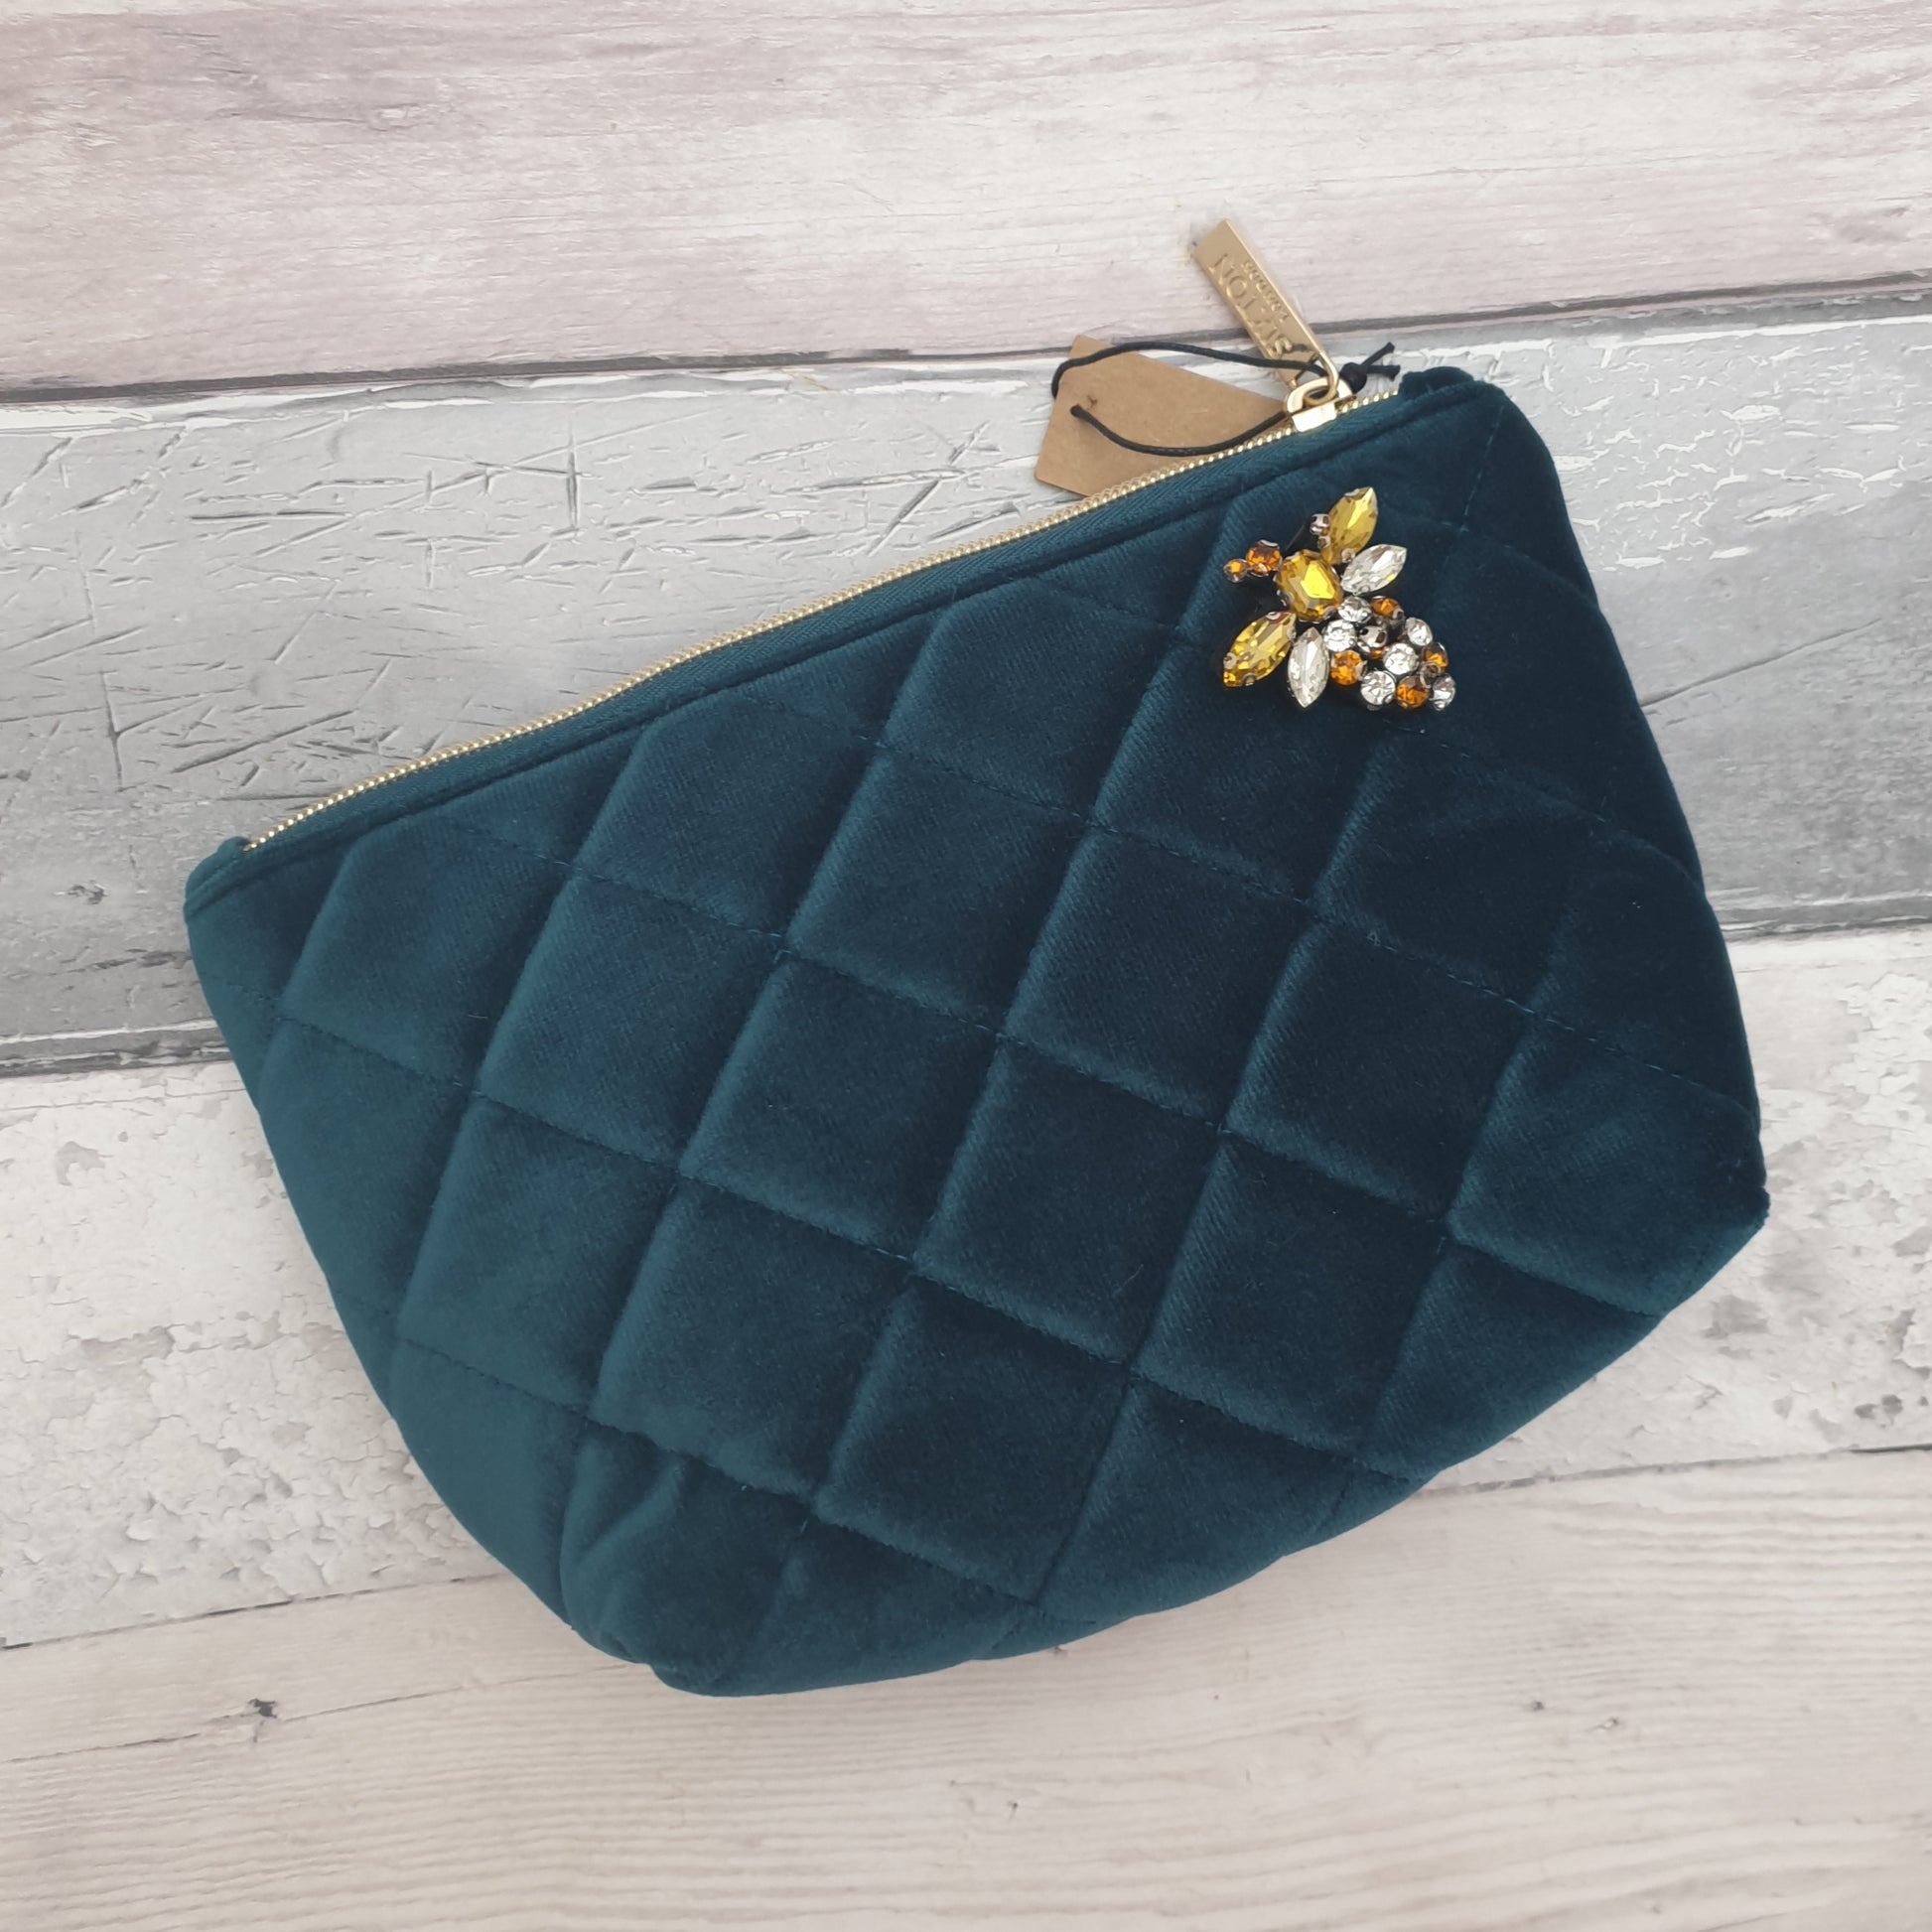 Teal Blue Make Up Bag made from quilted velvet with a Glass Bee Brooch in Gold.